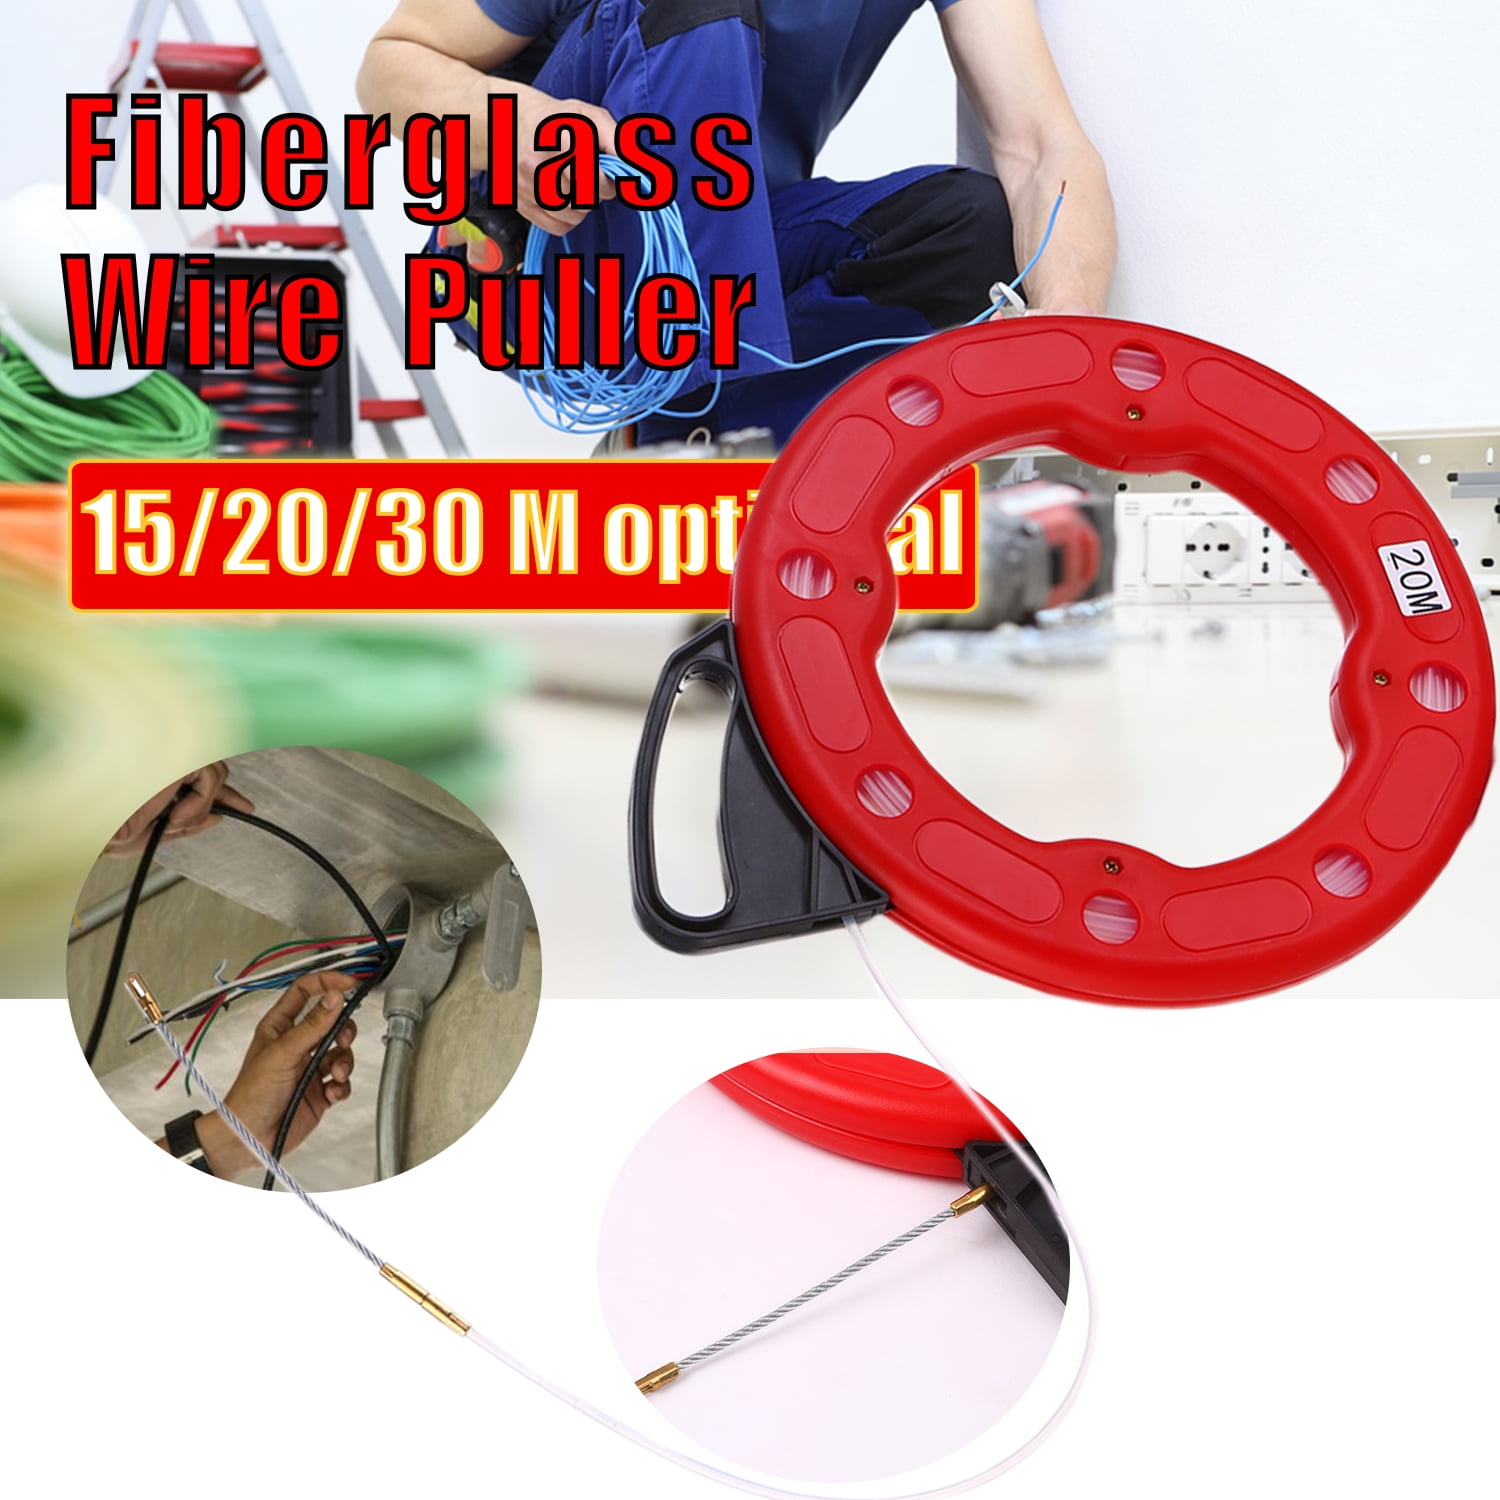 20M Fiberglass Fish Tape Reel Puller Conductive Electrical Cable Puller A9G0